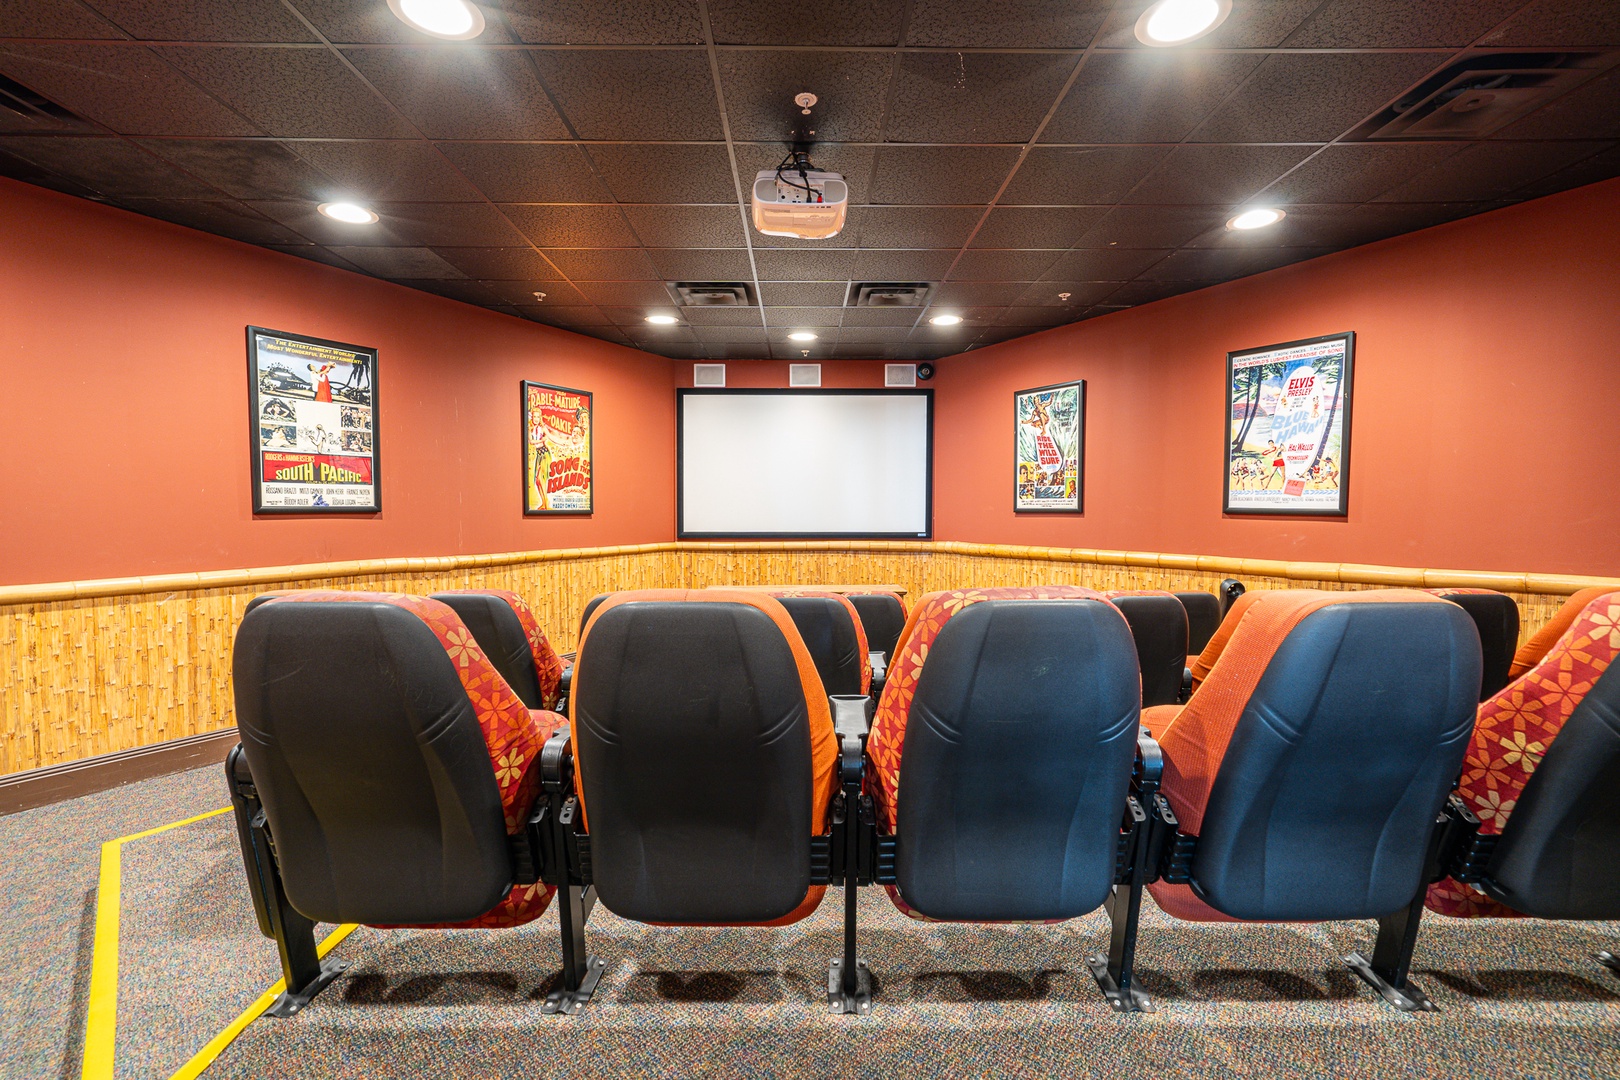 Head to the resort cinema & unwind with a great movie!